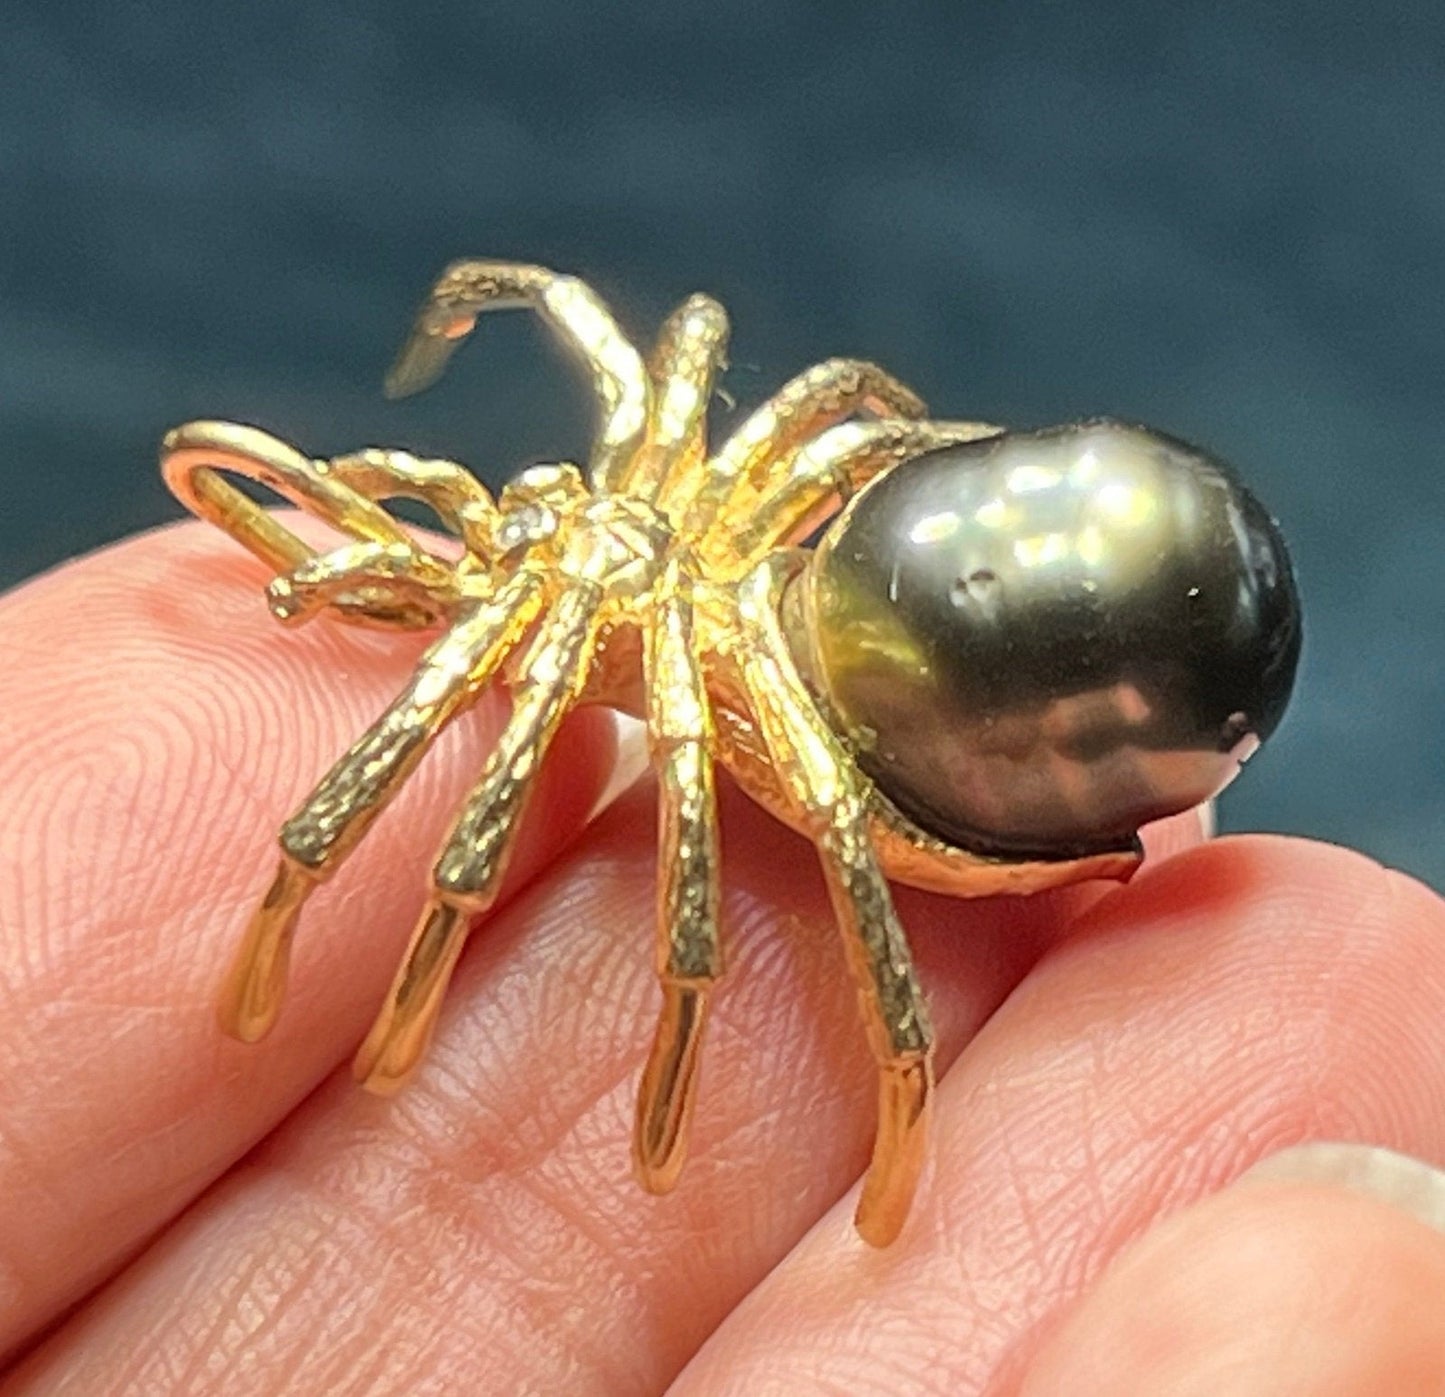 Tab Shell Round Painted Spiders Pendant